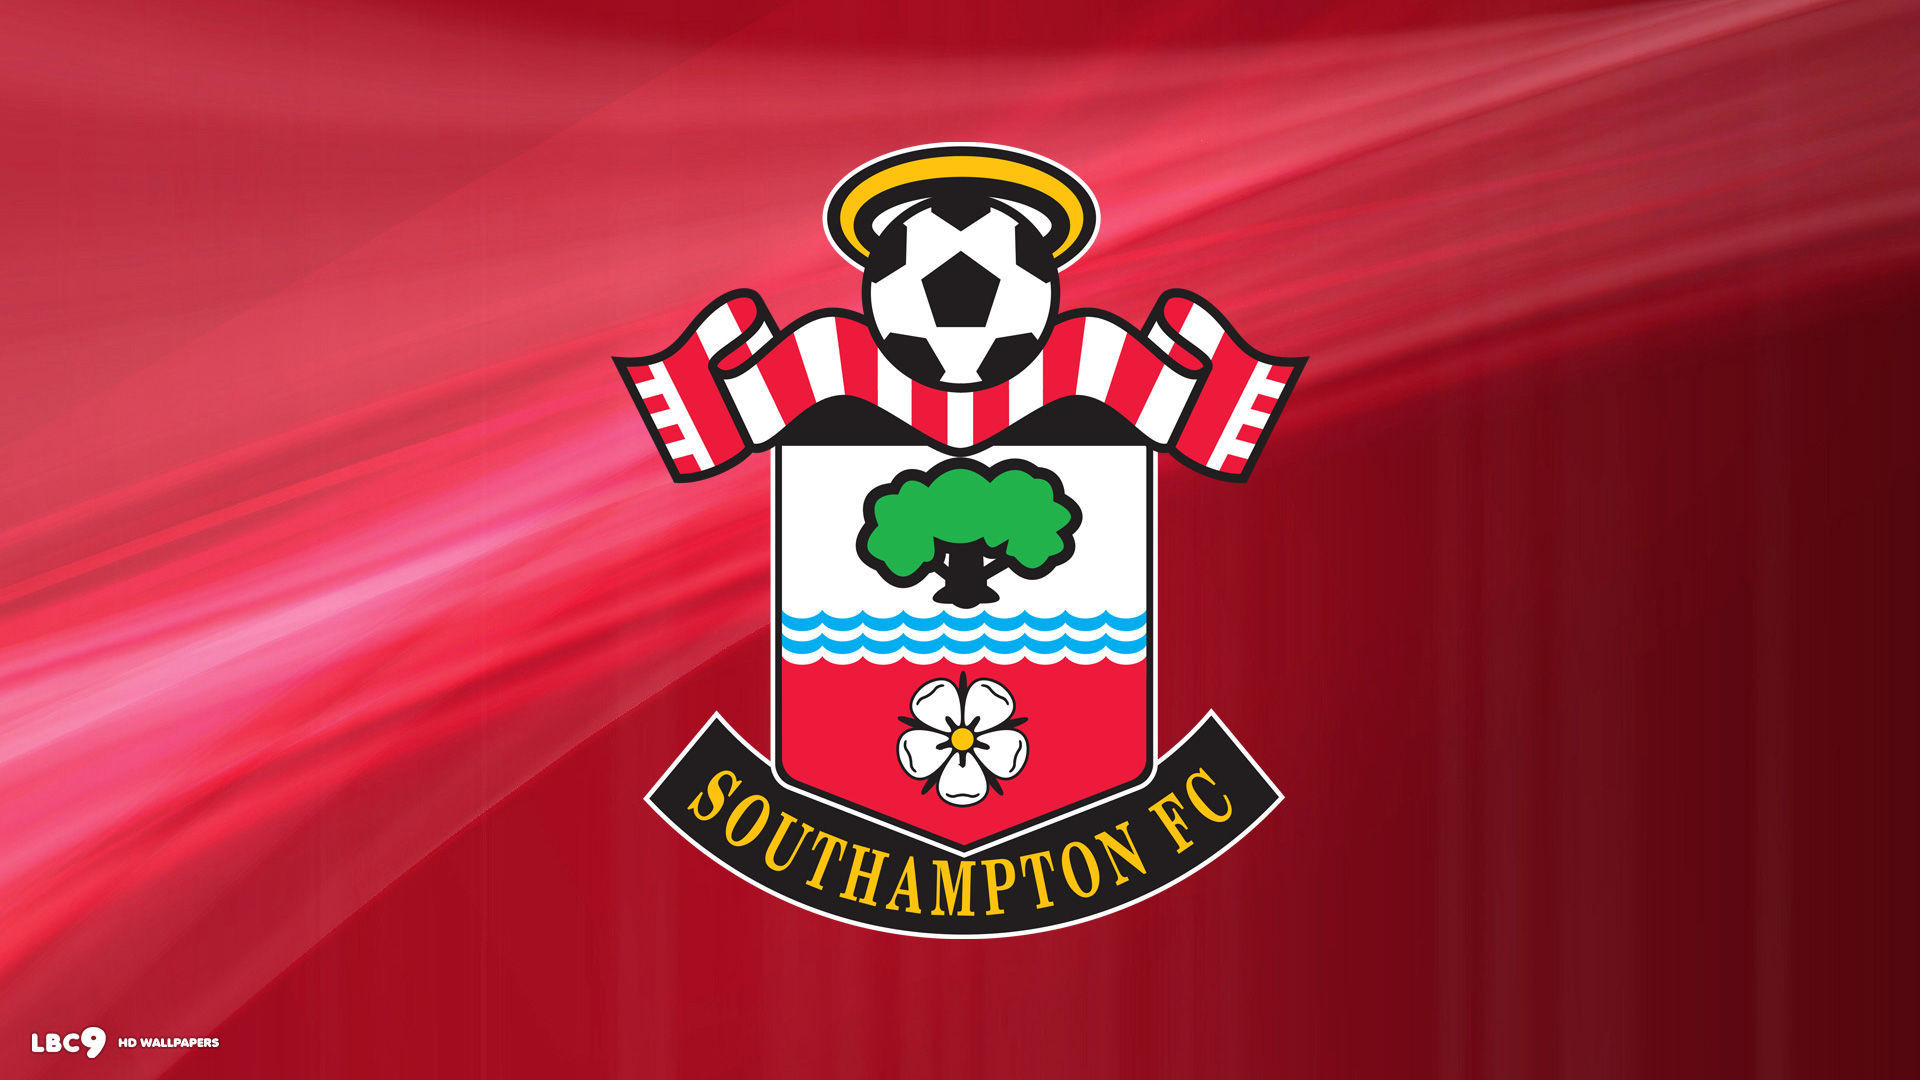 1920x1080 Famous Football club Southampton wallpapers and images - wallpapers,  pictures, photos